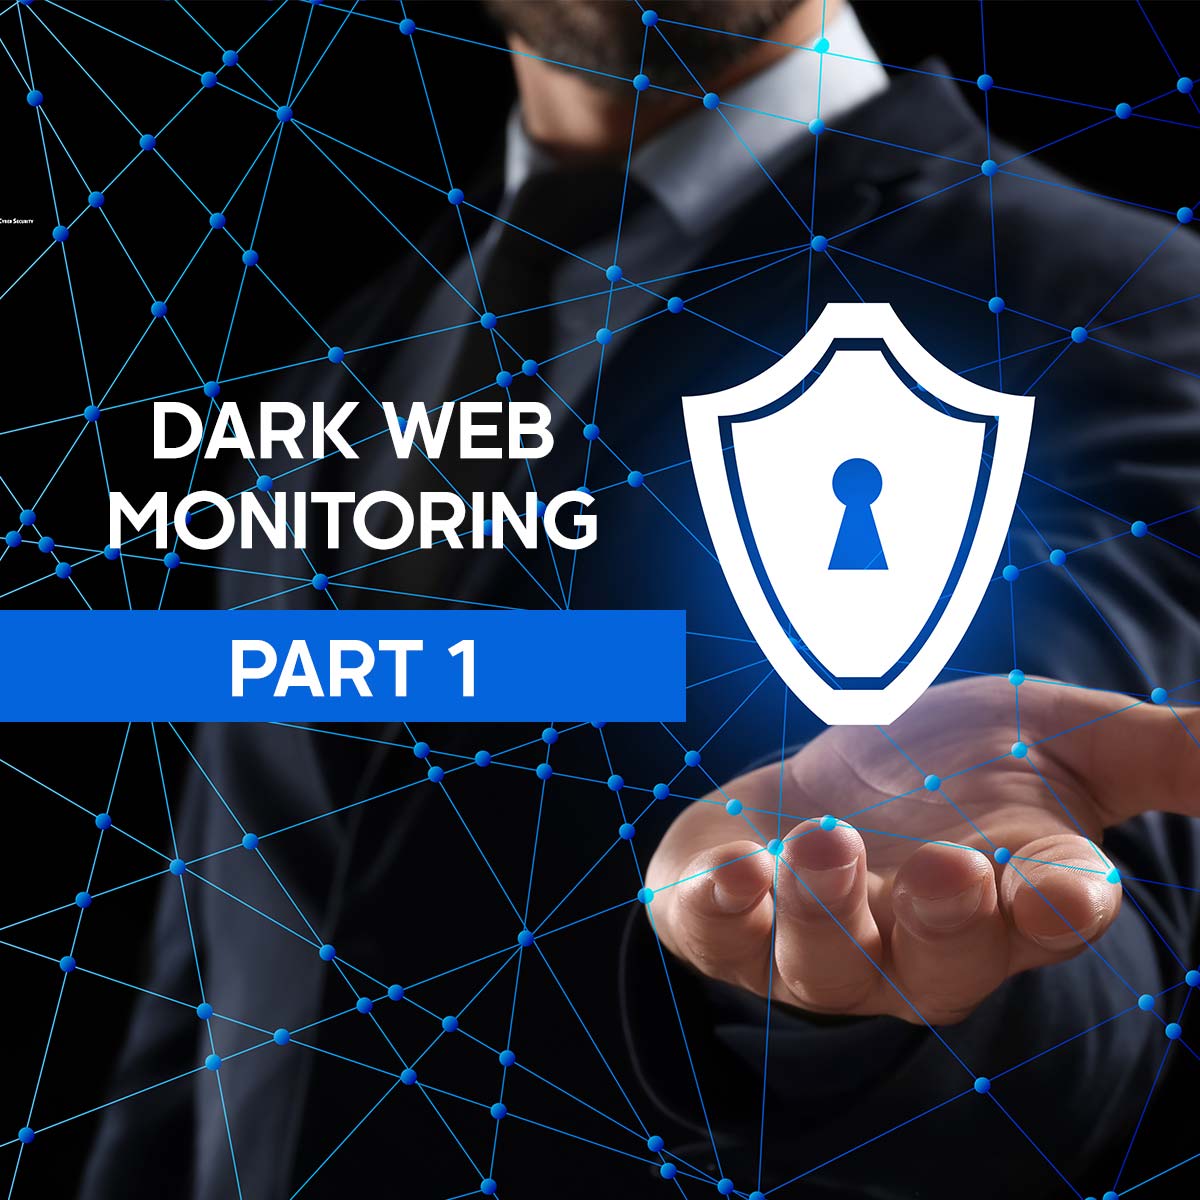 Safeguarding Your Online Privacy: A Guide to Dark Web Access and Monitoring